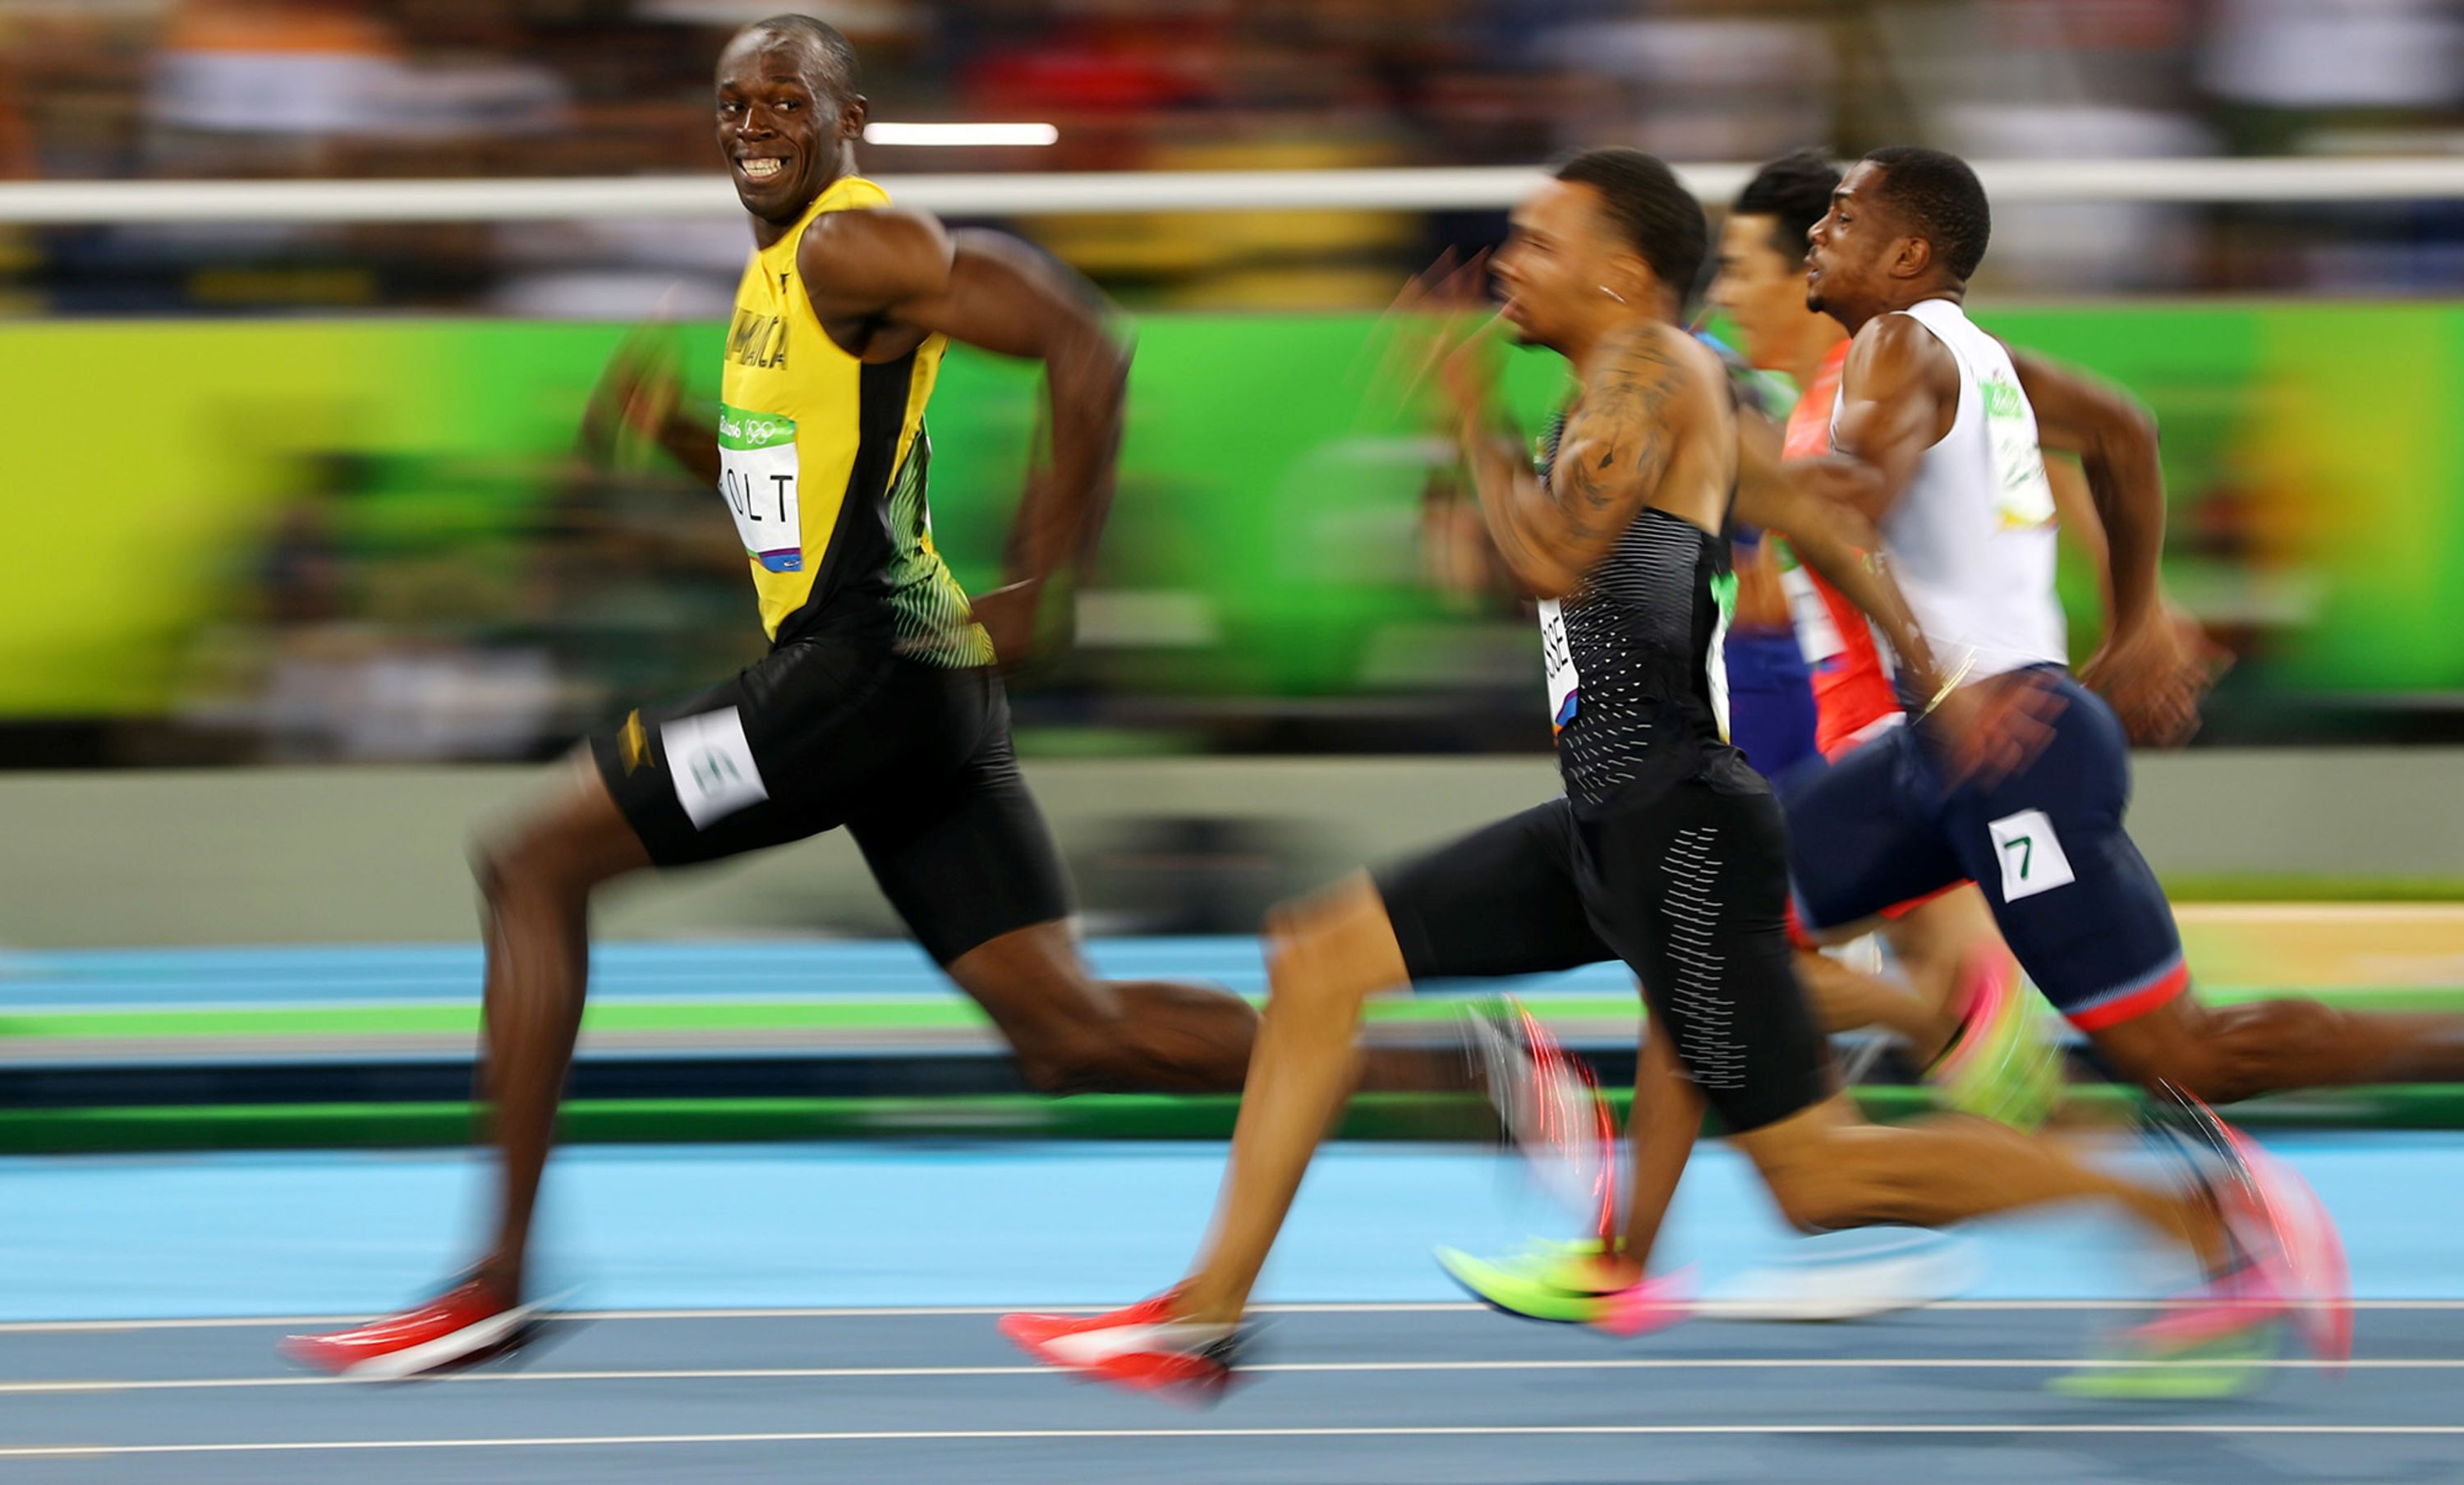 Jamaican sprinter Usain Bolt looks back at his Olympic competitors during a 100-meter semifinal in 2016. Bolt won the final a short time later, becoming the first man in history to win the 100 meters at three straight Olympic Games. Bolt, the world-record holder in the 100 and 200 meters, won eight gold medals during his legendary Olympic career.